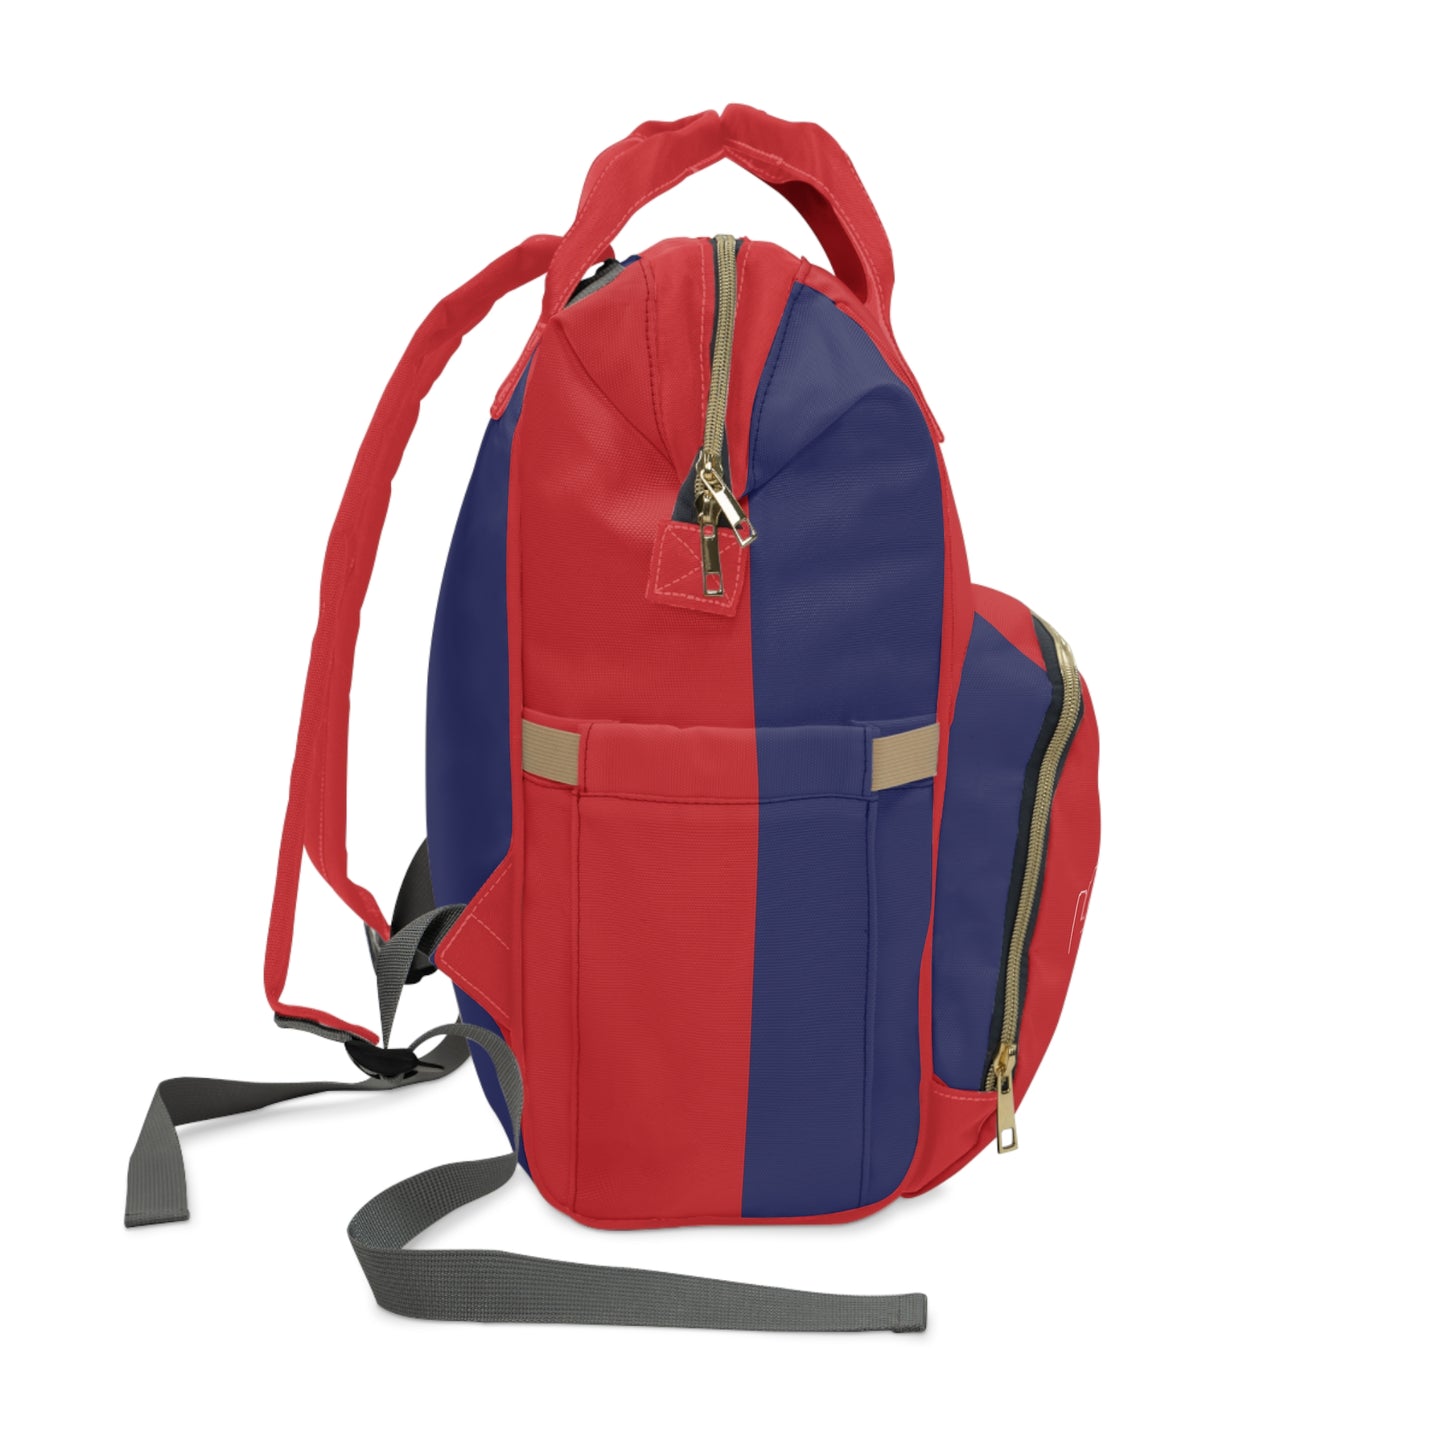 Cleveland - Red White and Blue City series - Multifunctional Diaper Backpack